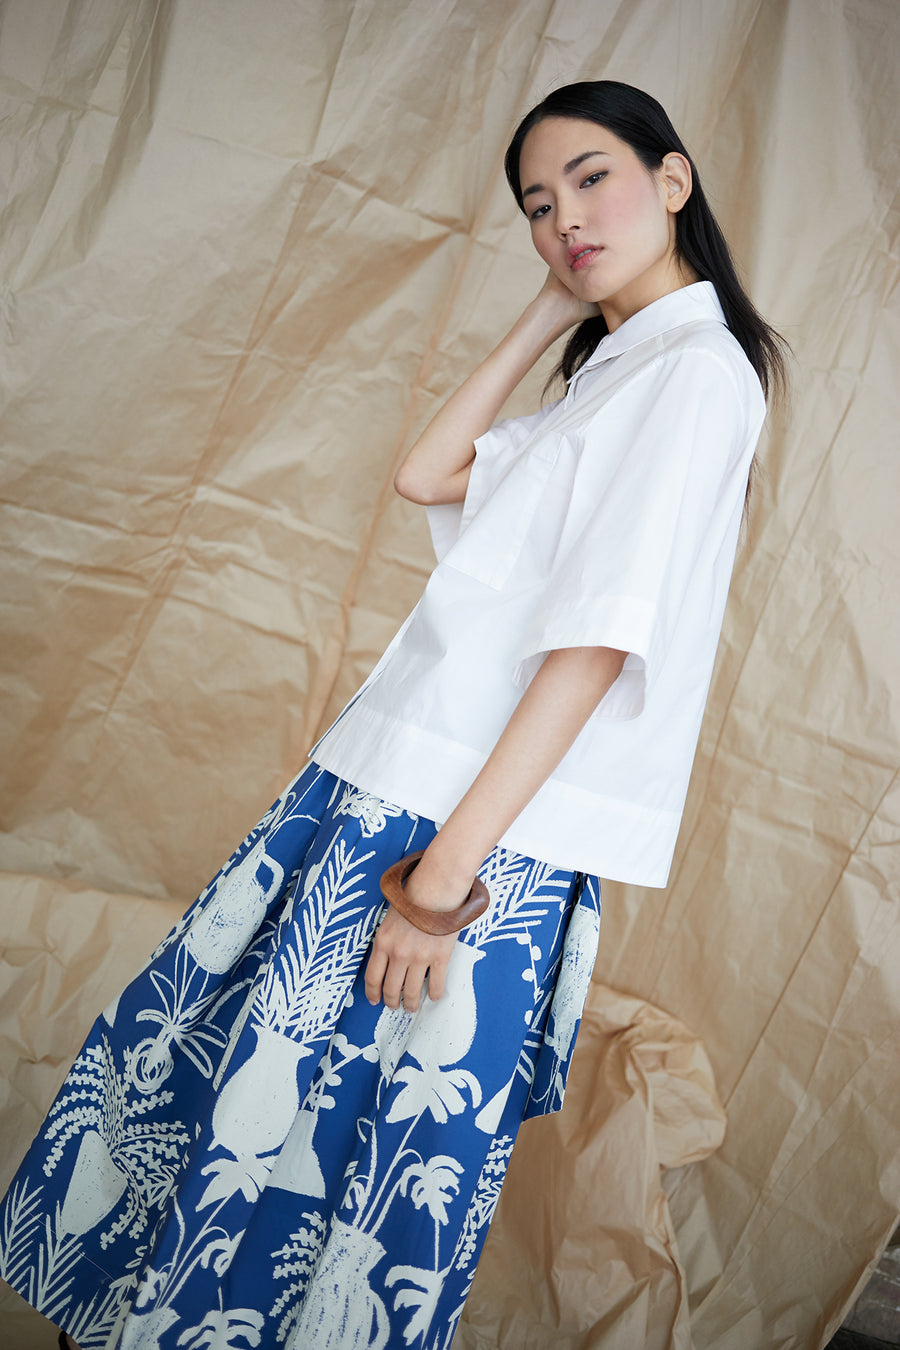 Kimani Skirt in Potted Plant Print Blue/White